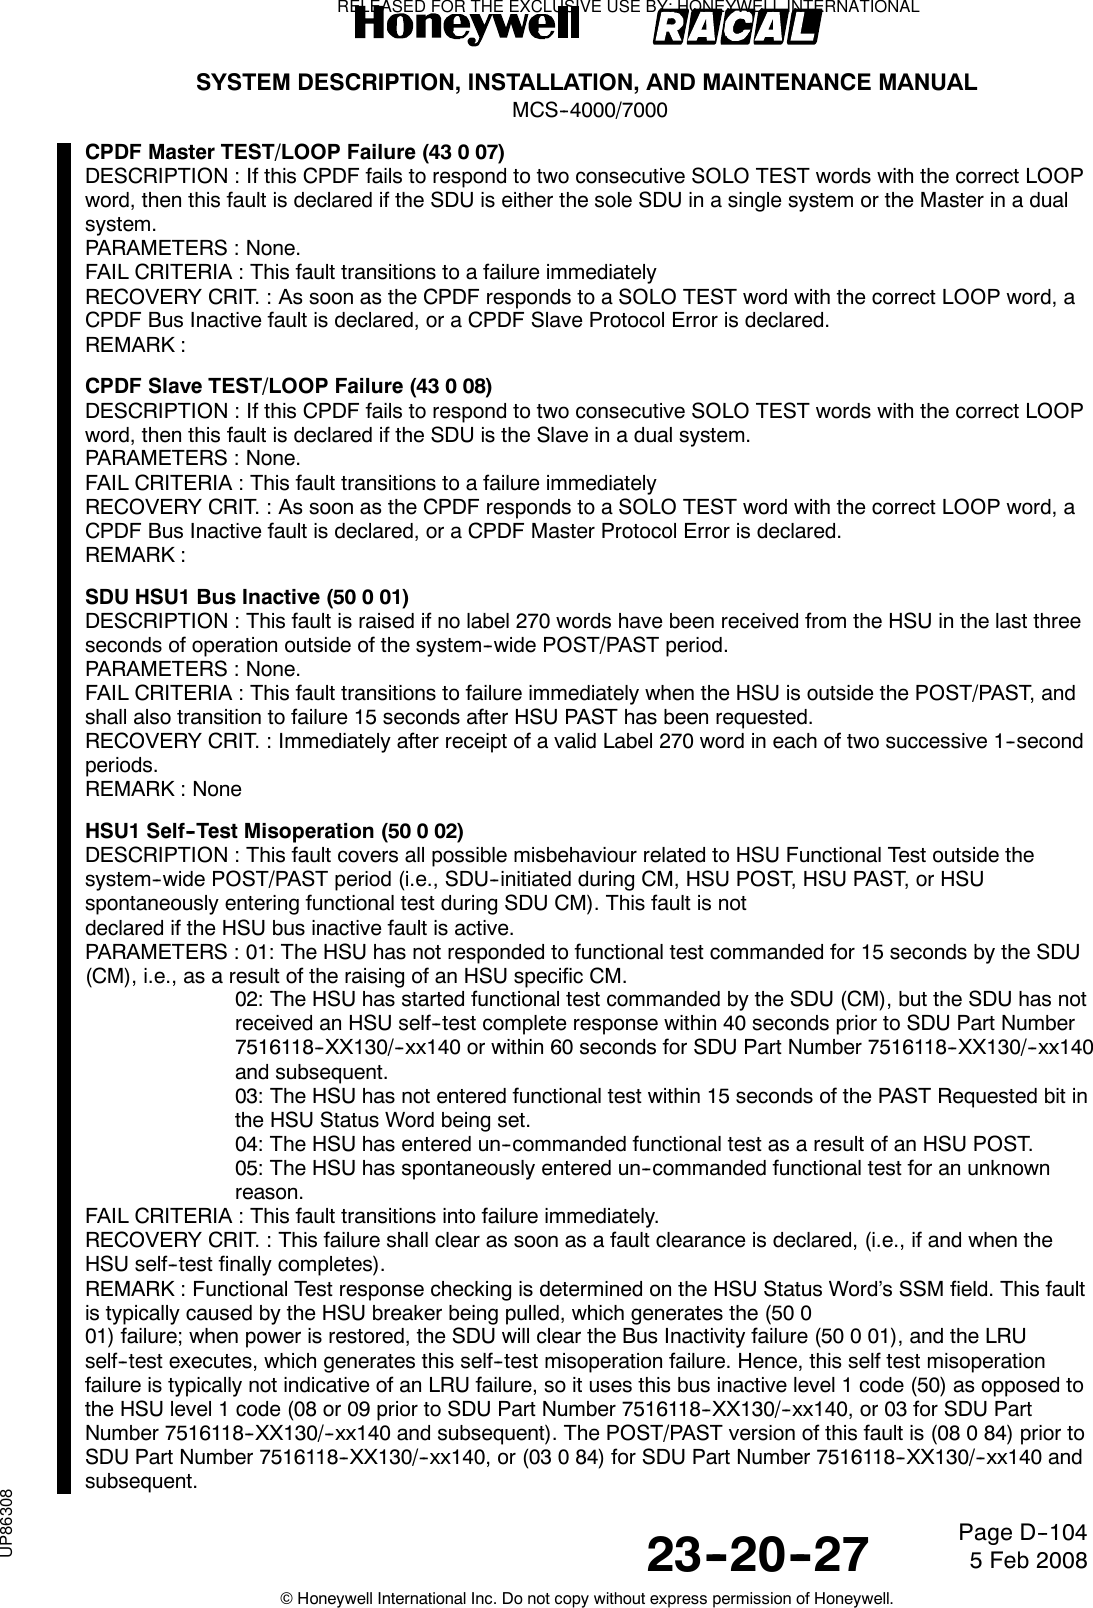 SYSTEM DESCRIPTION, INSTALLATION, AND MAINTENANCE MANUALMCS--4000/700023--20--27 5 Feb 2008©Honeywell International Inc. Do not copy without express permission of Honeywell.Page D--104CPDF Master TEST/LOOP Failure (43 0 07)DESCRIPTION : If this CPDF fails to respond to two consecutive SOLO TEST words with the correct LOOPword, then this fault is declared if the SDU is either the sole SDU in a single system or the Master in a dualsystem.PARAMETERS : None.FAIL CRITERIA : This fault transitions to a failure immediatelyRECOVERY CRIT. : As soon as the CPDF responds to a SOLO TEST word with the correct LOOP word, aCPDF Bus Inactive fault is declared, or a CPDF Slave Protocol Error is declared.REMARK :CPDF Slave TEST/LOOP Failure (43 0 08)DESCRIPTION : If this CPDF fails to respond to two consecutive SOLO TEST words with the correct LOOPword, then this fault is declared if the SDU is the Slave in a dual system.PARAMETERS : None.FAIL CRITERIA : This fault transitions to a failure immediatelyRECOVERY CRIT. : As soon as the CPDF responds to a SOLO TEST word with the correct LOOP word, aCPDF Bus Inactive fault is declared, or a CPDF Master Protocol Error is declared.REMARK :SDU HSU1 Bus Inactive (50 0 01)DESCRIPTION : This fault is raised if no label 270 words have been received from the HSU in the last threeseconds of operation outside of the system--wide POST/PAST period.PARAMETERS : None.FAIL CRITERIA : This fault transitions to failure immediately when the HSU is outside the POST/PAST, andshall also transition to failure 15 seconds after HSU PAST has been requested.RECOVERY CRIT. : Immediately after receipt of a valid Label 270 word in each of two successive 1--secondperiods.REMARK : NoneHSU1 Self--Test Misoperation (50 0 02)DESCRIPTION : This fault covers all possible misbehaviour related to HSU Functional Test outside thesystem--wide POST/PAST period (i.e., SDU--initiated during CM, HSU POST, HSU PAST, or HSUspontaneously entering functional test during SDU CM). This fault is notdeclared if the HSU bus inactive fault is active.PARAMETERS : 01: The HSU has not responded to functional test commanded for 15 seconds by the SDU(CM), i.e., as a result of the raising of an HSU specific CM.02: The HSU has started functional test commanded by the SDU (CM), but the SDU has notreceived an HSU self--test complete response within 40 seconds prior to SDU Part Number7516118--XX130/--xx140 or within 60 seconds for SDU Part Number 7516118--XX130/--xx140and subsequent.03: The HSU has not entered functional test within 15 seconds of the PAST Requested bit inthe HSU Status Word being set.04: The HSU has entered un--commanded functional test as a result of an HSU POST.05: The HSU has spontaneously entered un--commanded functional test for an unknownreason.FAIL CRITERIA : This fault transitions into failure immediately.RECOVERY CRIT. : This failure shall clear as soon as a fault clearance is declared, (i.e., if and when theHSU self--test finally completes).REMARK : Functional Test response checking is determined on the HSU Status Word’s SSM field. This faultis typically caused by the HSU breaker being pulled, which generates the (50 001) failure; when power is restored, the SDU will clear the Bus Inactivity failure (50 0 01), and the LRUself--test executes, which generates this self--test misoperation failure. Hence, this self test misoperationfailure is typically not indicative of an LRU failure, so it uses this bus inactive level 1 code (50) as opposed tothe HSU level 1 code (08 or 09 prior to SDU Part Number 7516118--XX130/--xx140, or 03 for SDU PartNumber 7516118--XX130/--xx140 and subsequent). The POST/PAST version of this fault is (08 0 84) prior toSDU Part Number 7516118--XX130/--xx140, or (03 0 84) for SDU Part Number 7516118--XX130/--xx140 andsubsequent.RELEASED FOR THE EXCLUSIVE USE BY: HONEYWELL INTERNATIONALUP86308